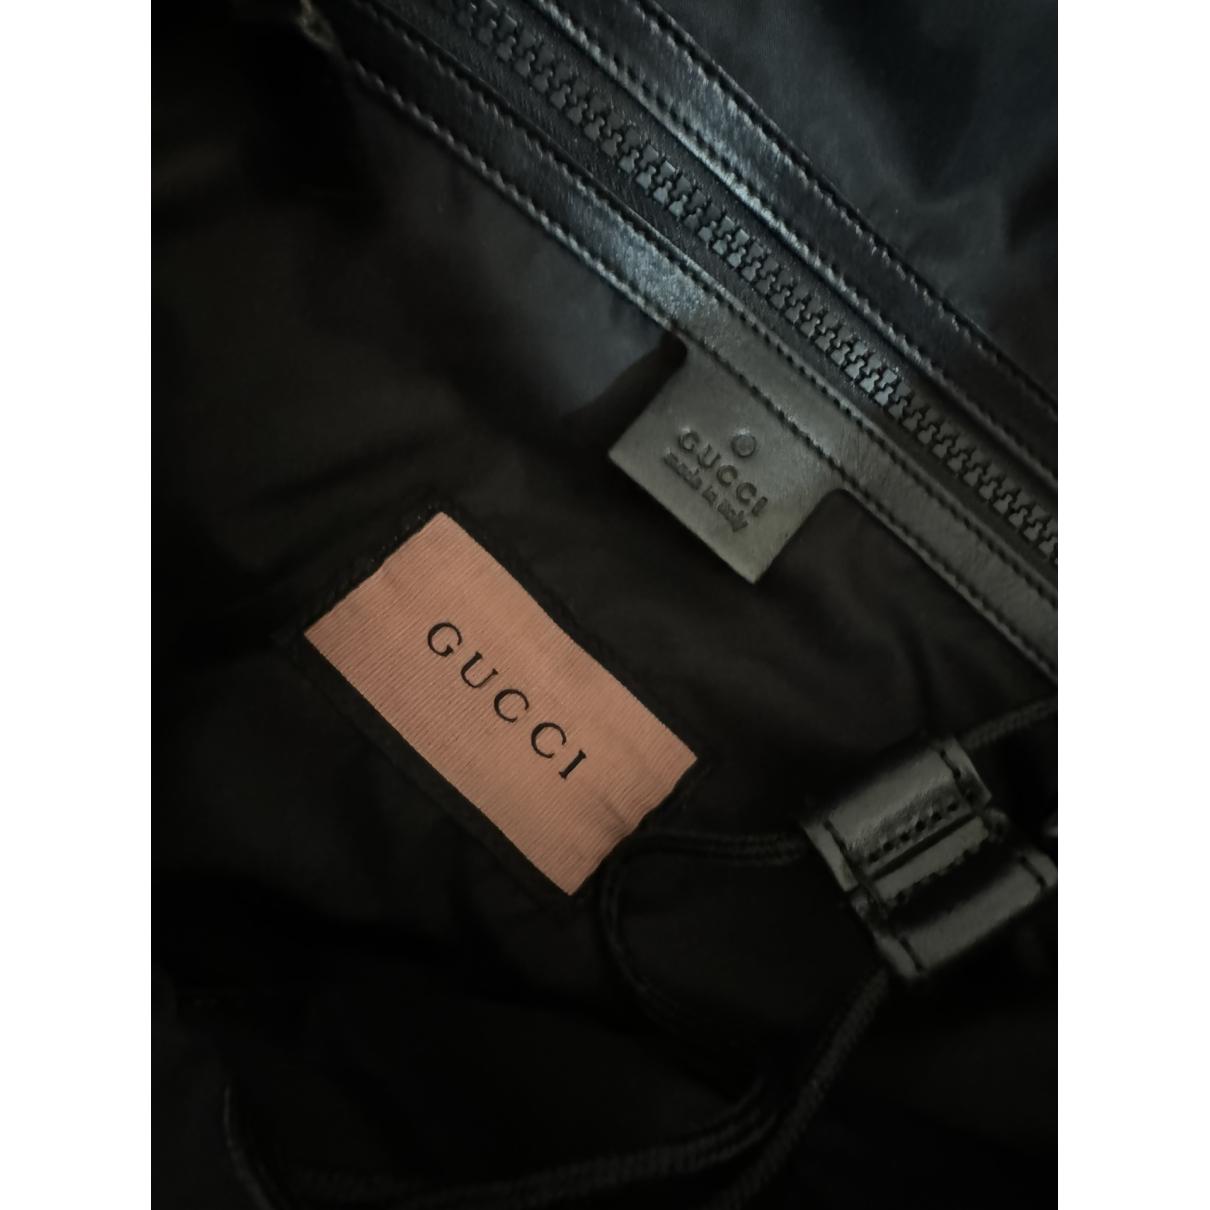 Buy Gucci Backpack online